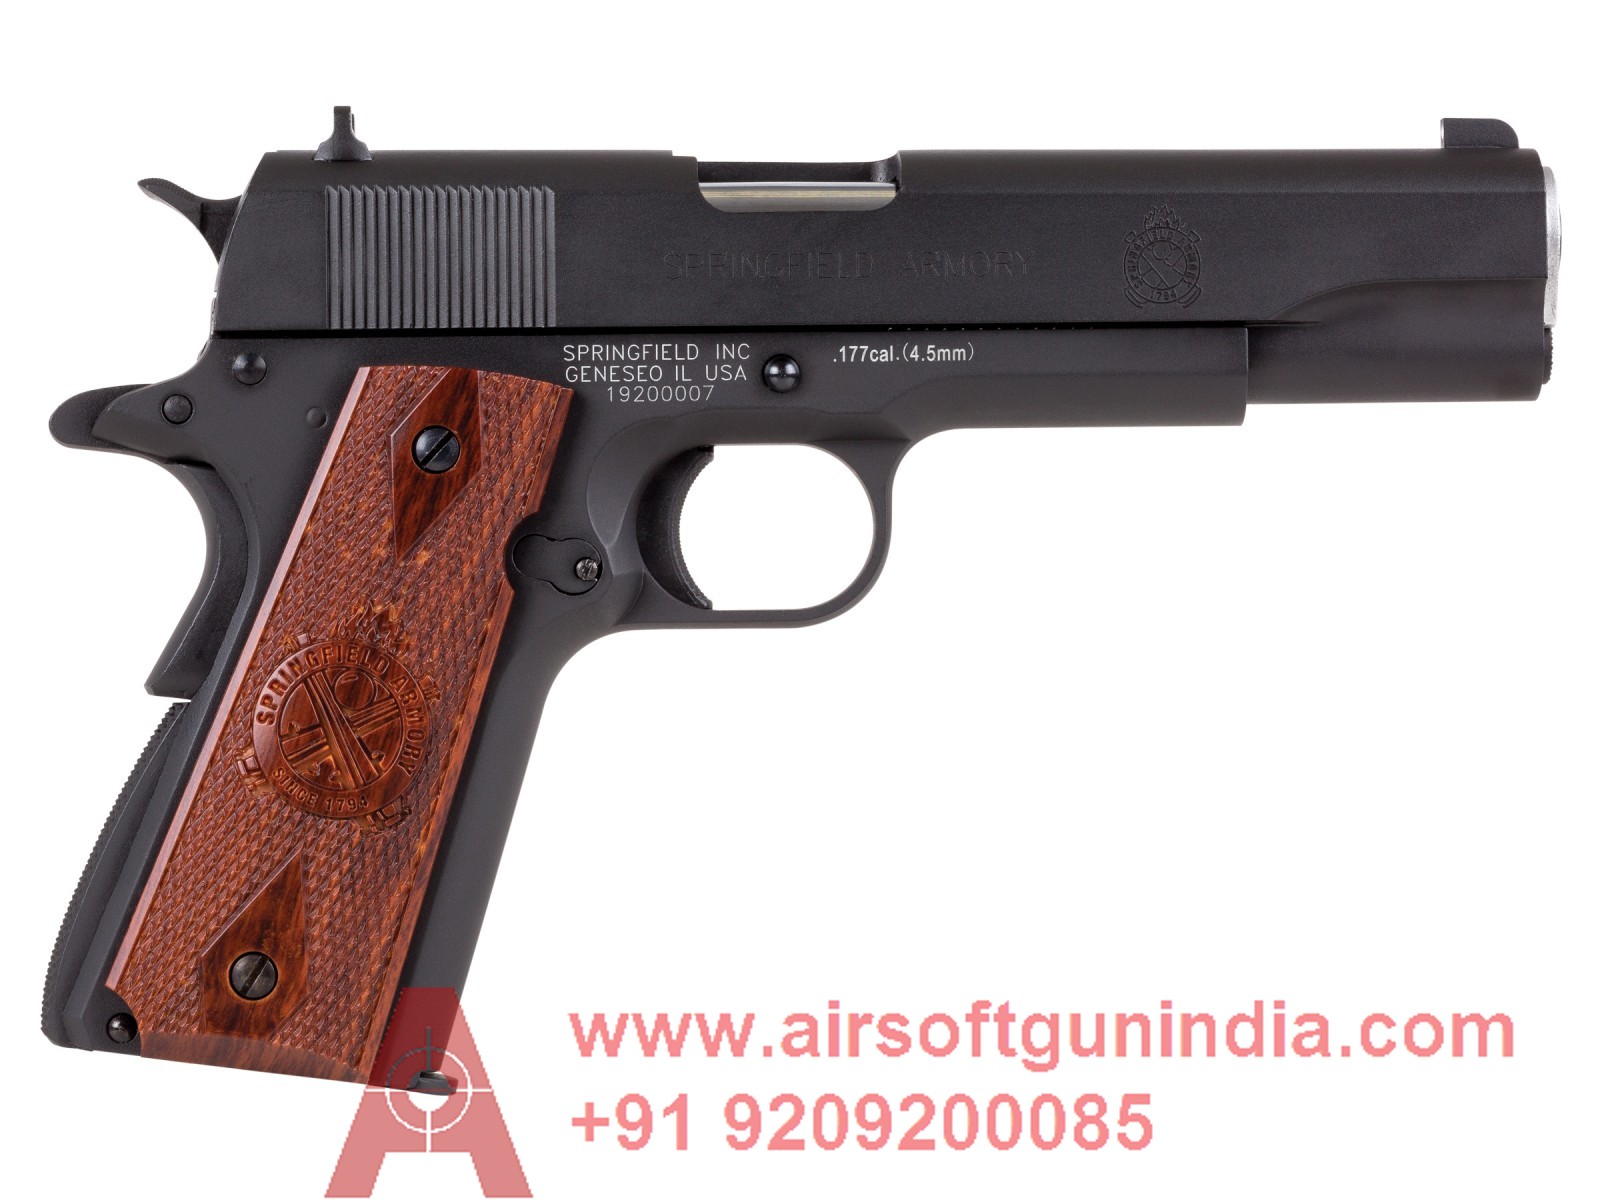 Springfield Armory 1911 Mil-Spec. CO2 .177 BB Gun In India